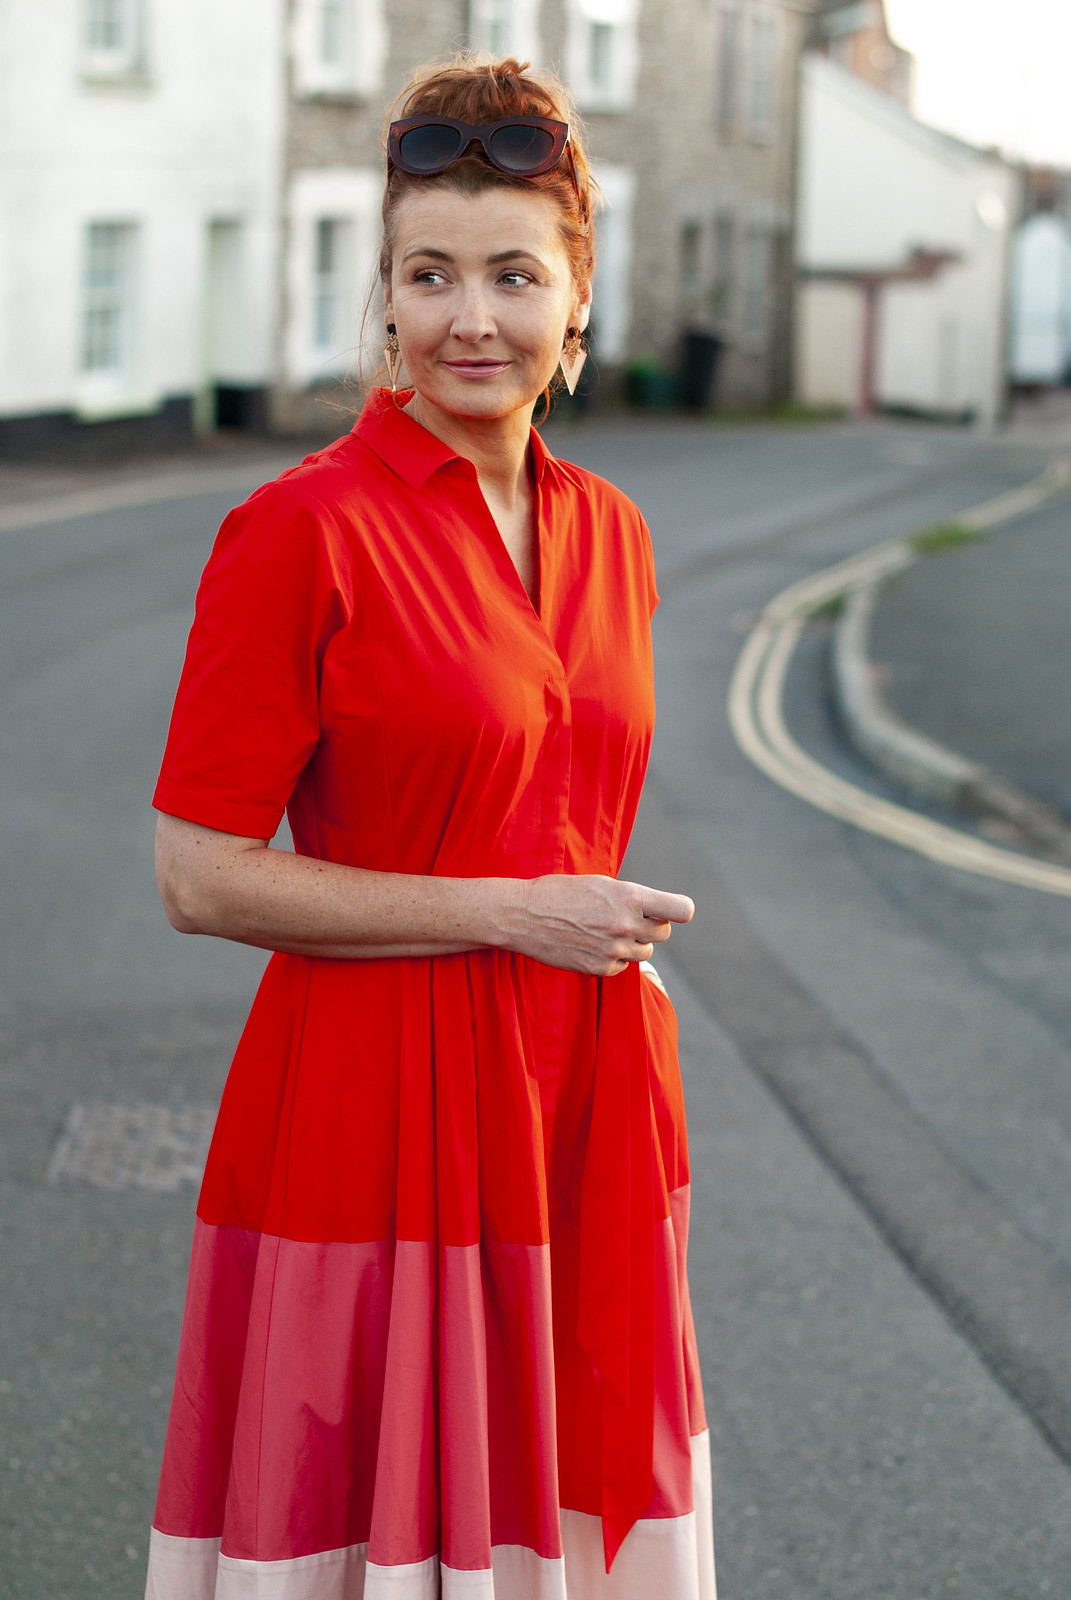 The Perfect Bold, Smart Summer Dress: A Red Ombré Shirt Dress | Not Dressed As Lamb, fashion for women over 40